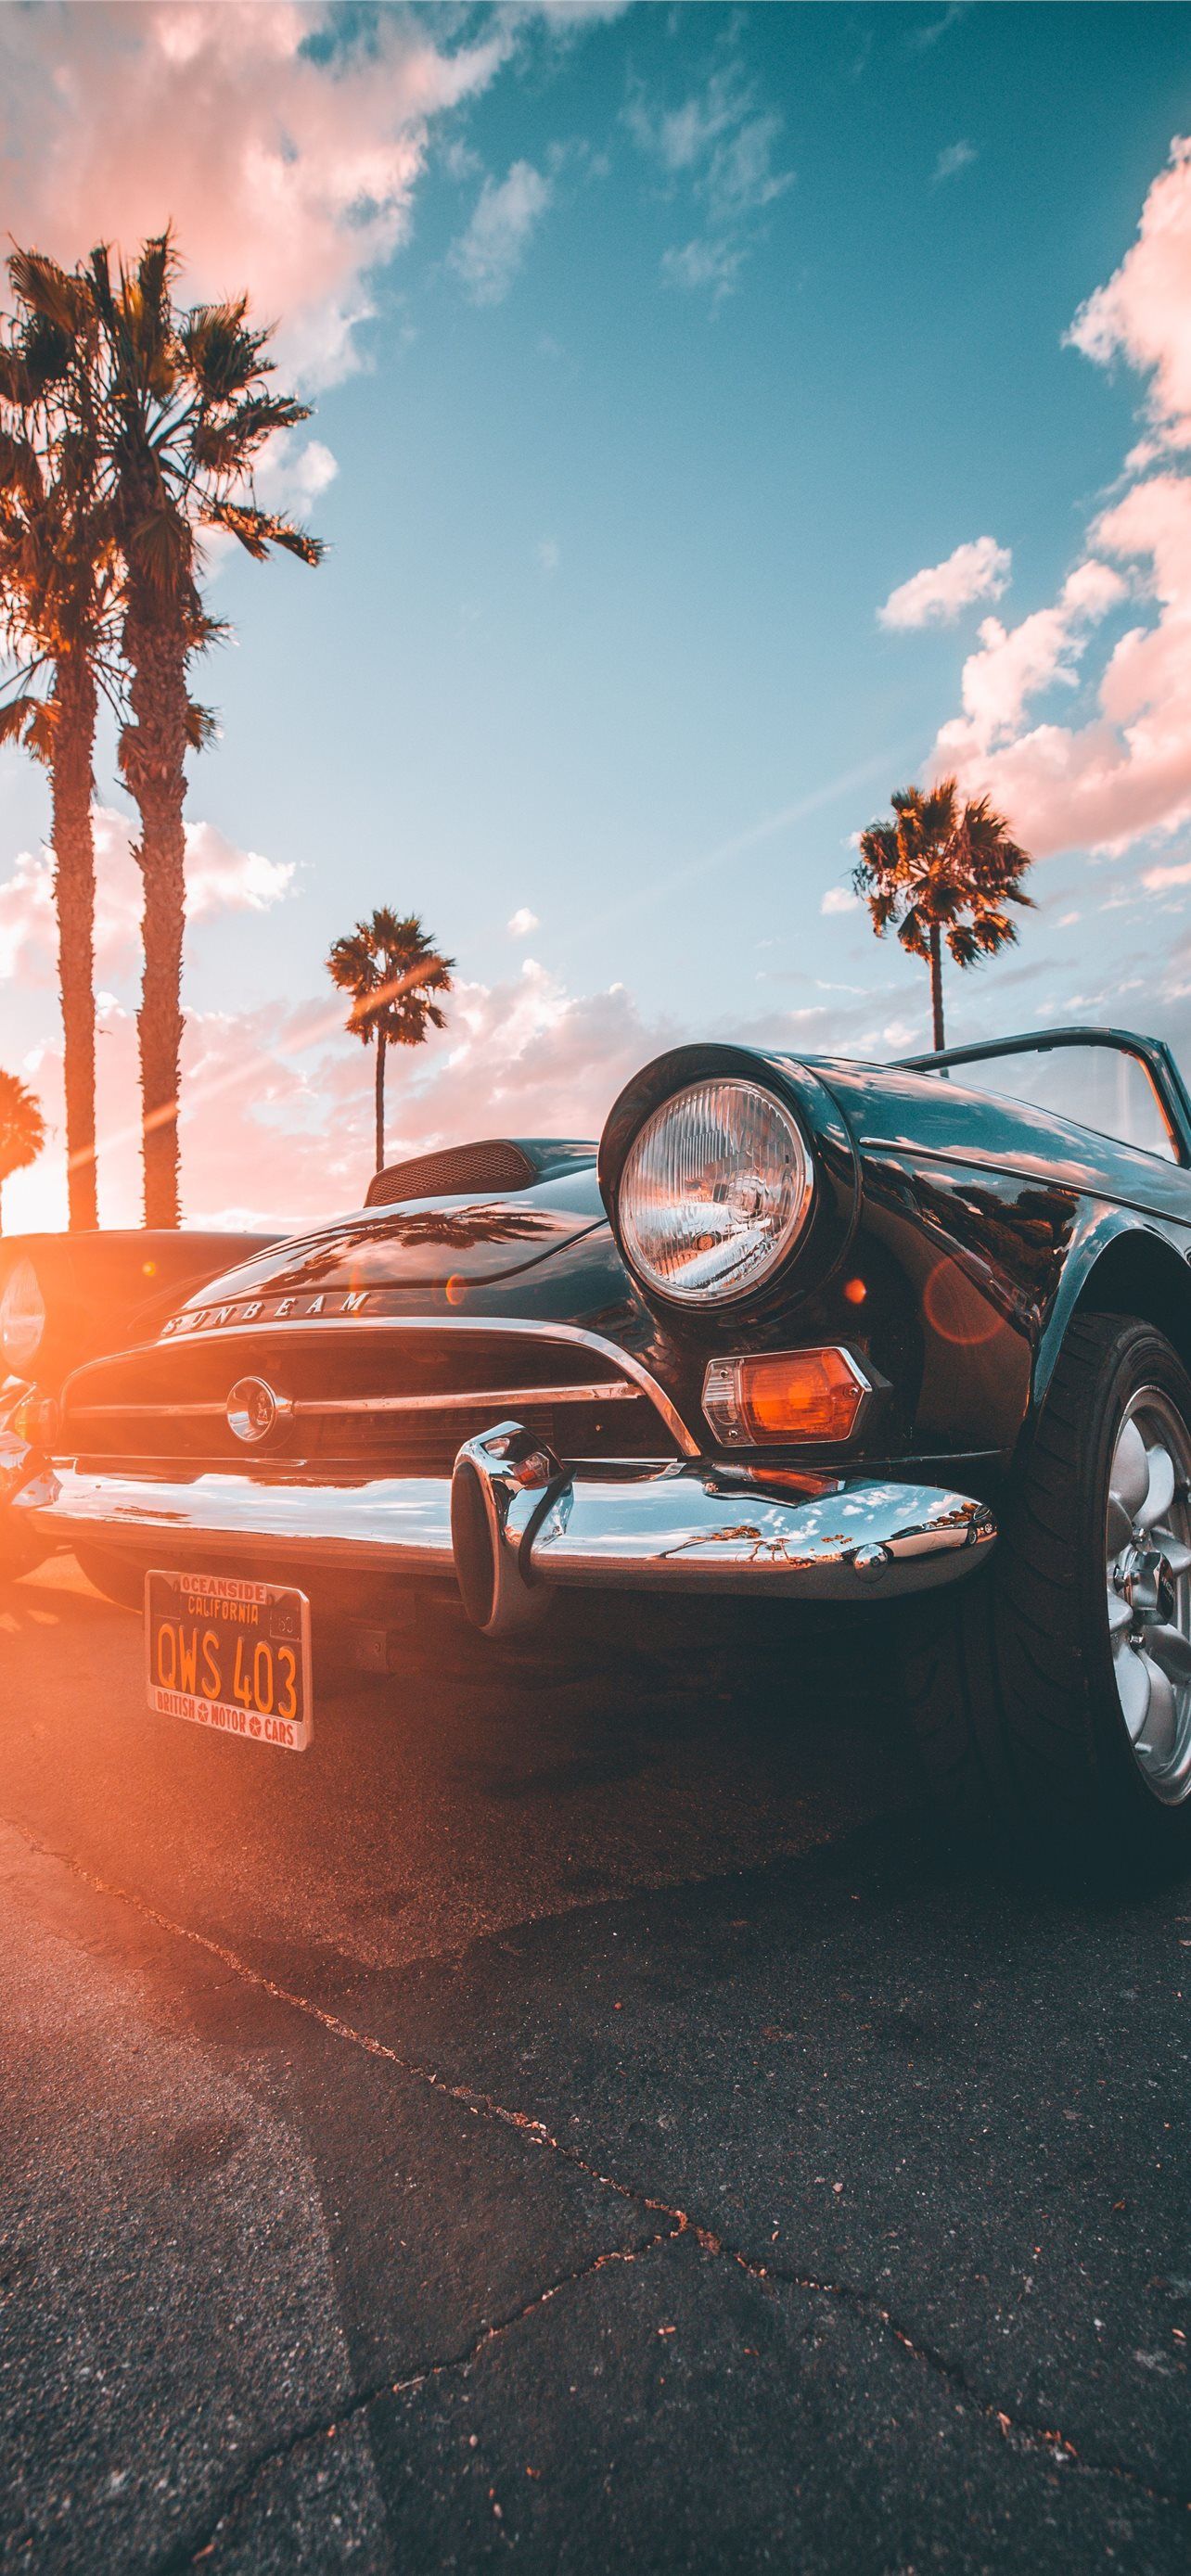 A car parked in front of palm trees - Cars, California, retro, 50s, vintage